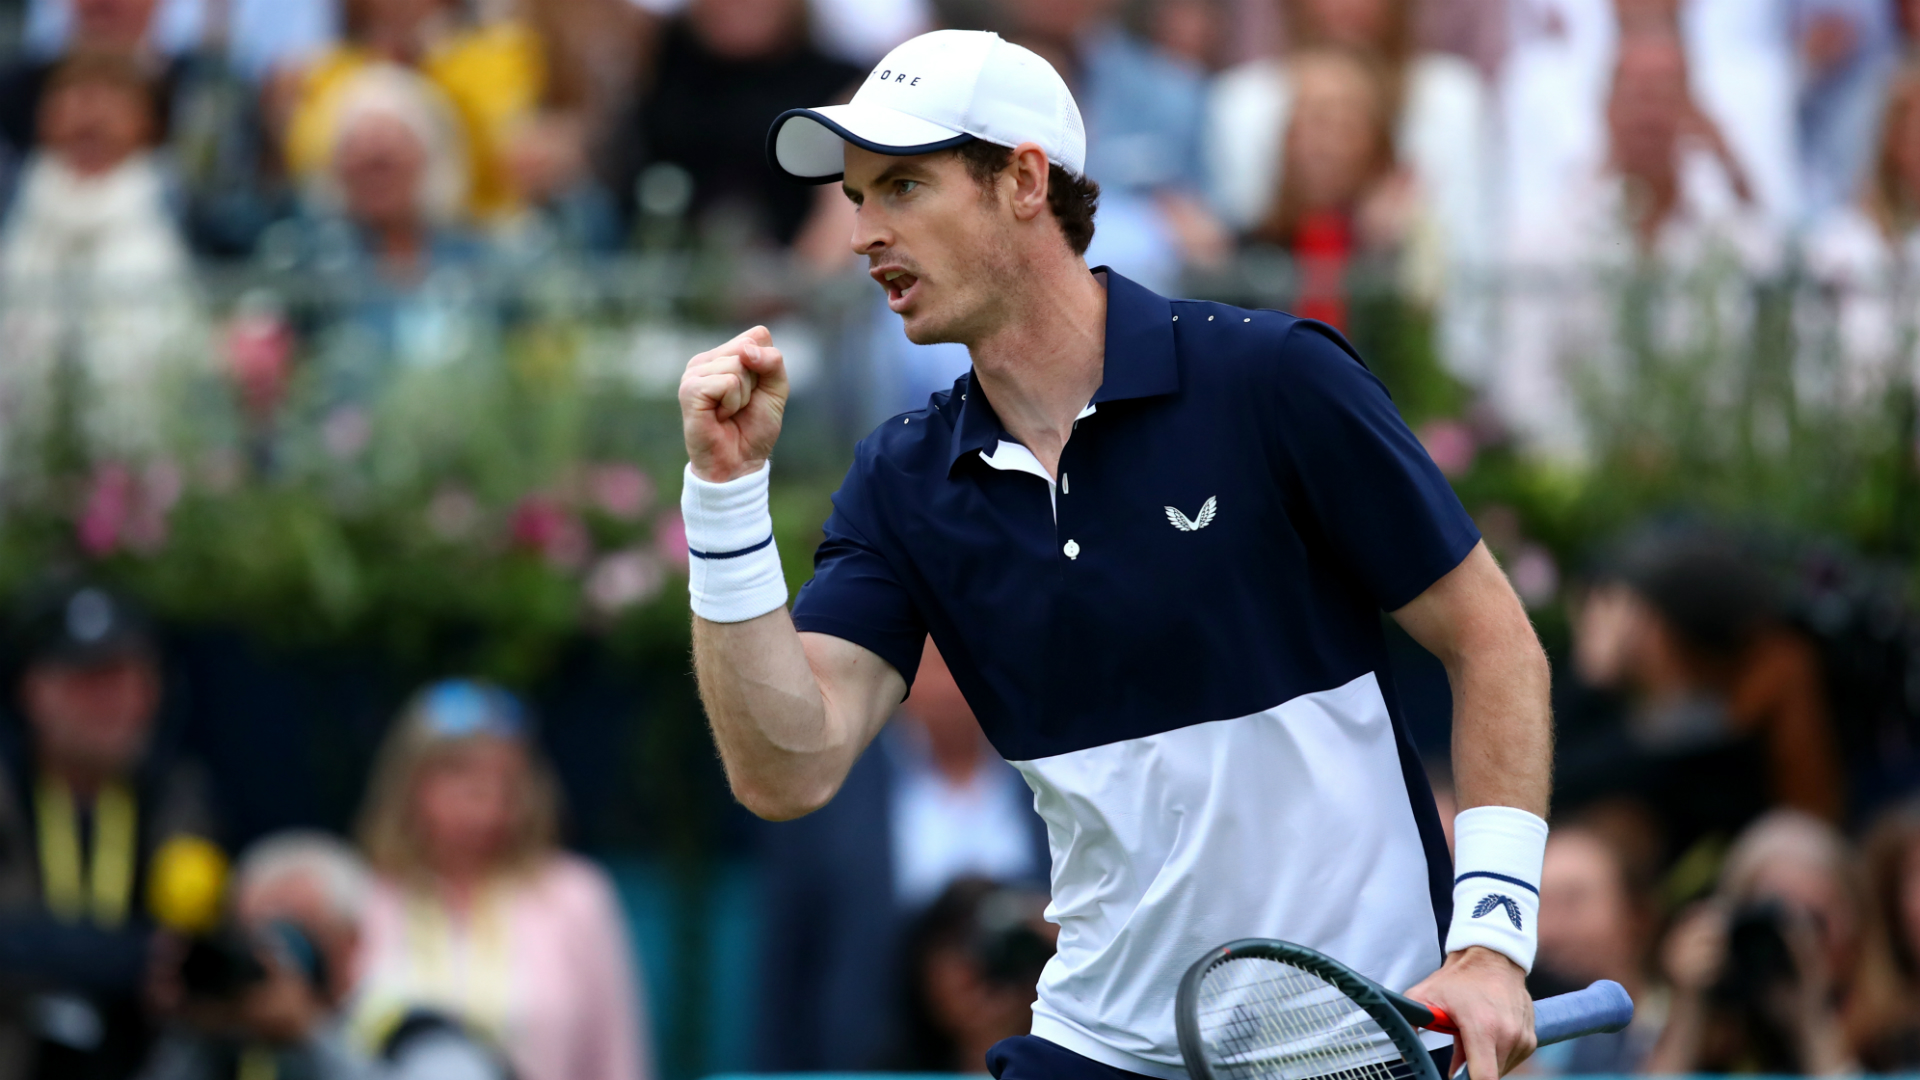 Former Wimbledon champion Andy Murray showed flickers of his brilliant best on his comeback in a memorable doubles win at Queen's Club.